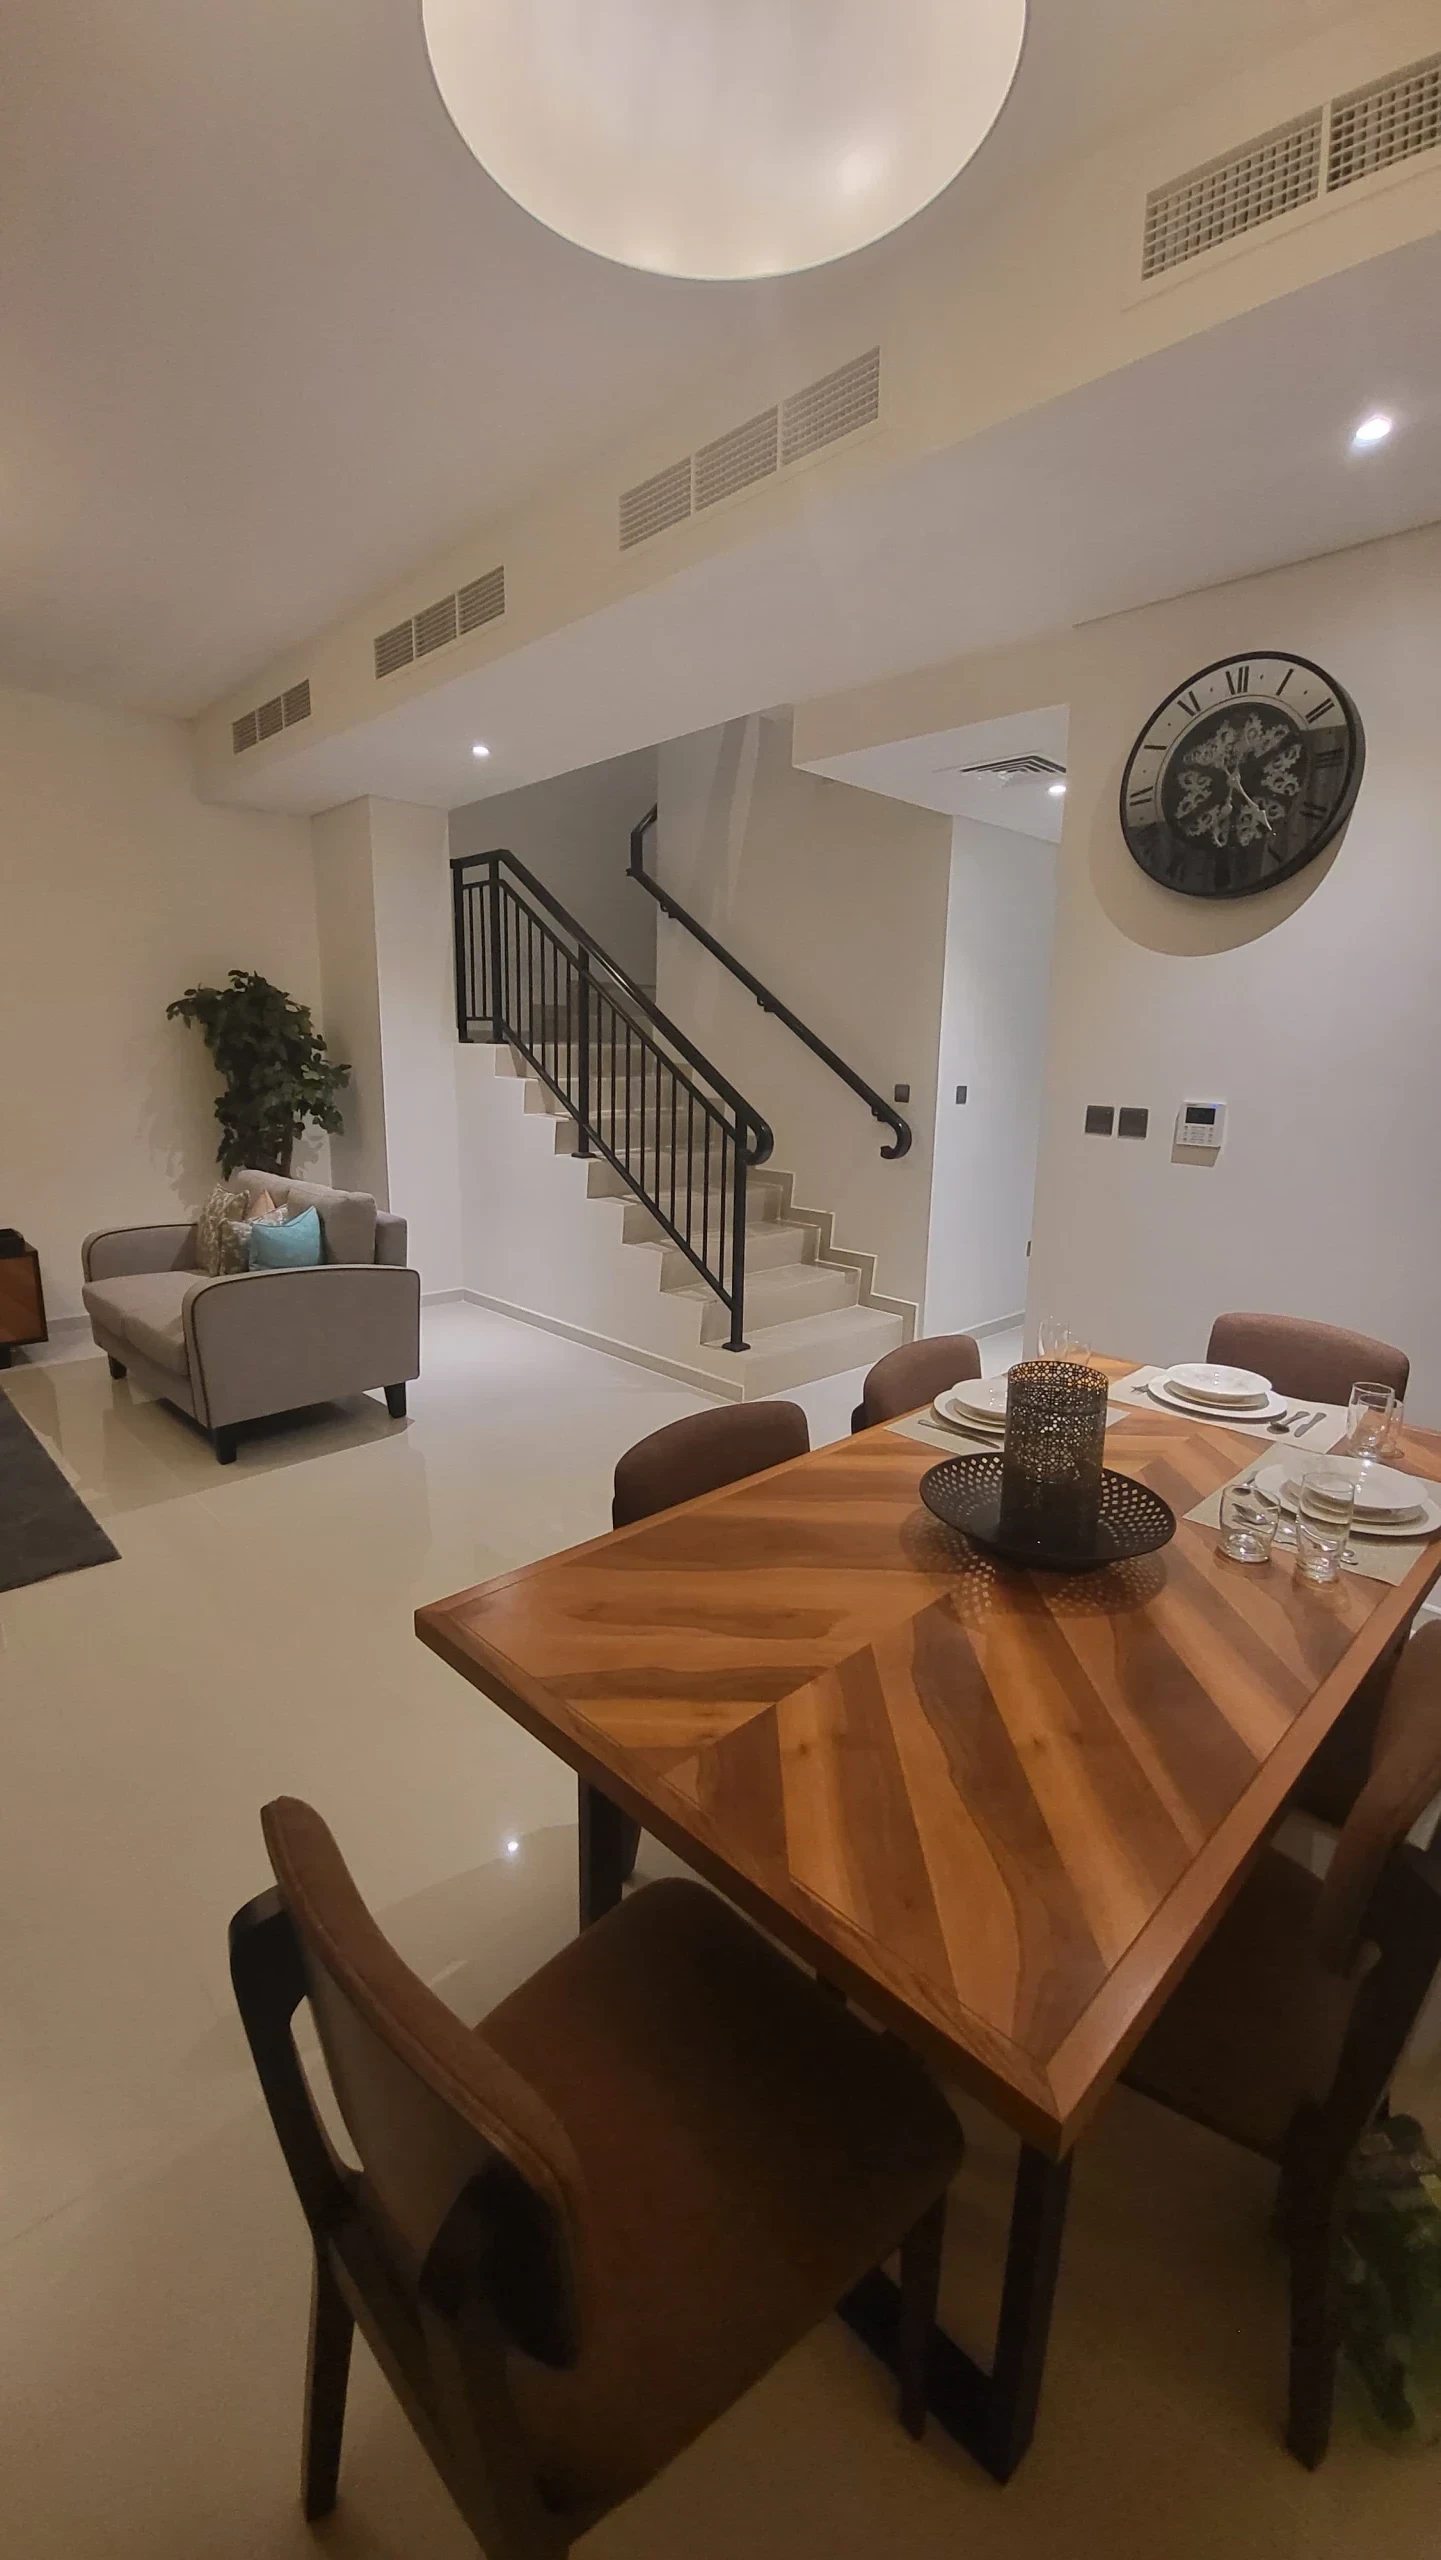 For Sale |3BR+maid | fully furnished 